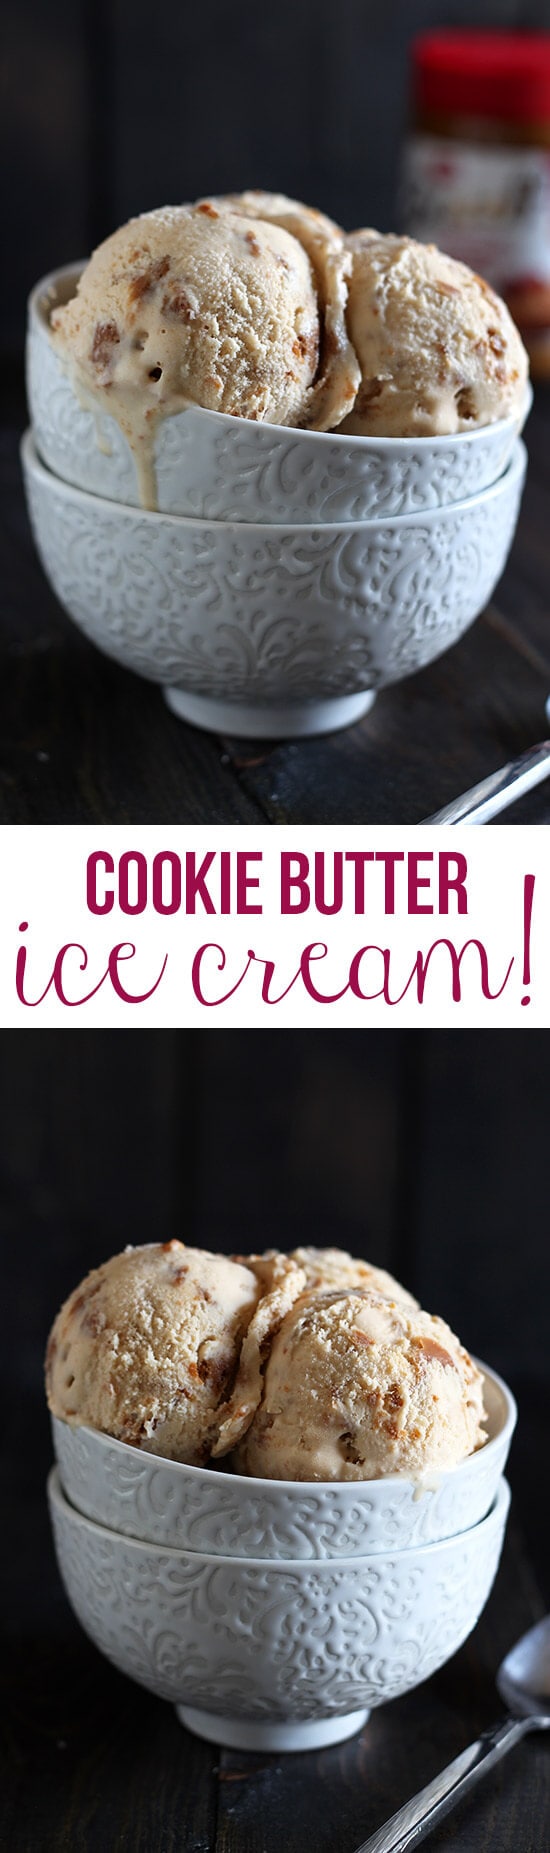 OBSESSED with this cookie butter ice cream! Super easy no-cook recipe he said was his FAVORITE ice cream flavor!